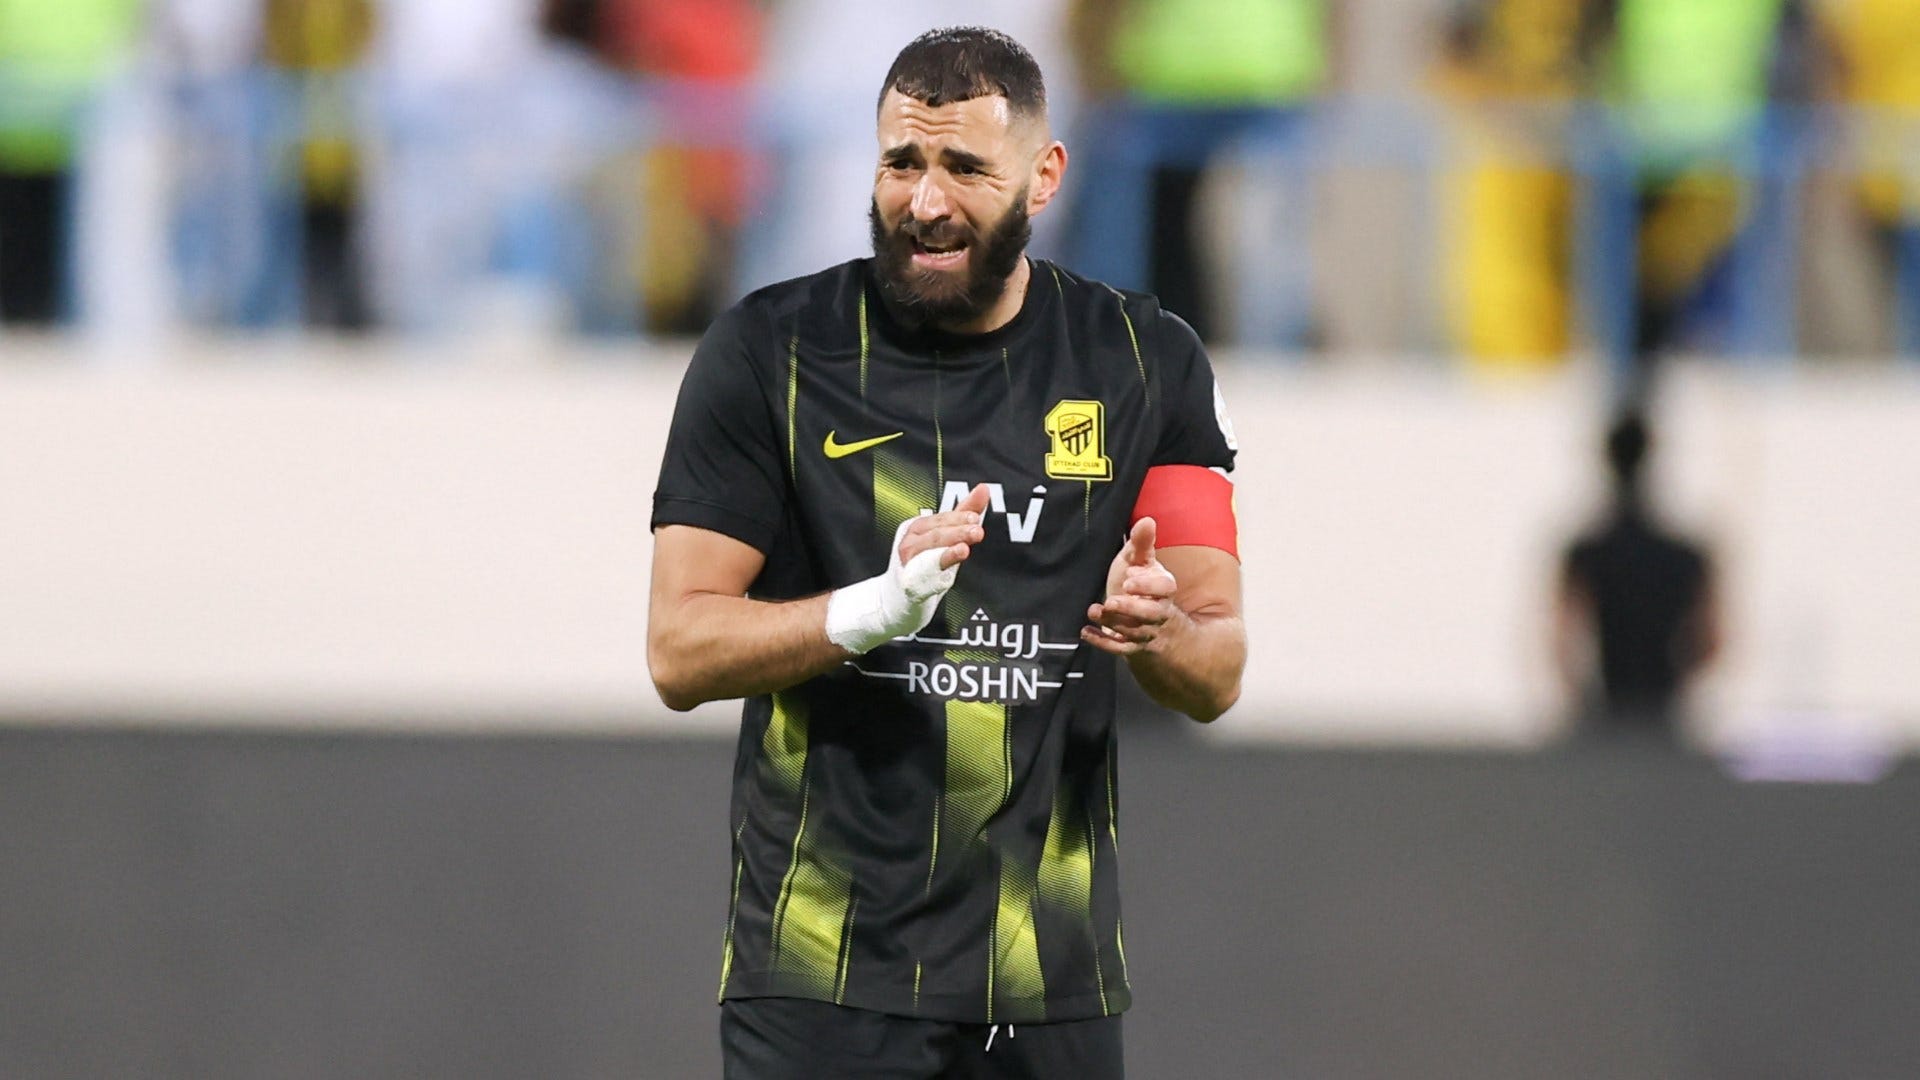 Explained: Why Karim Benzema's Al-Ittihad refused to take to field ahead of AFC Champions League tie against Iranian side Sepahan